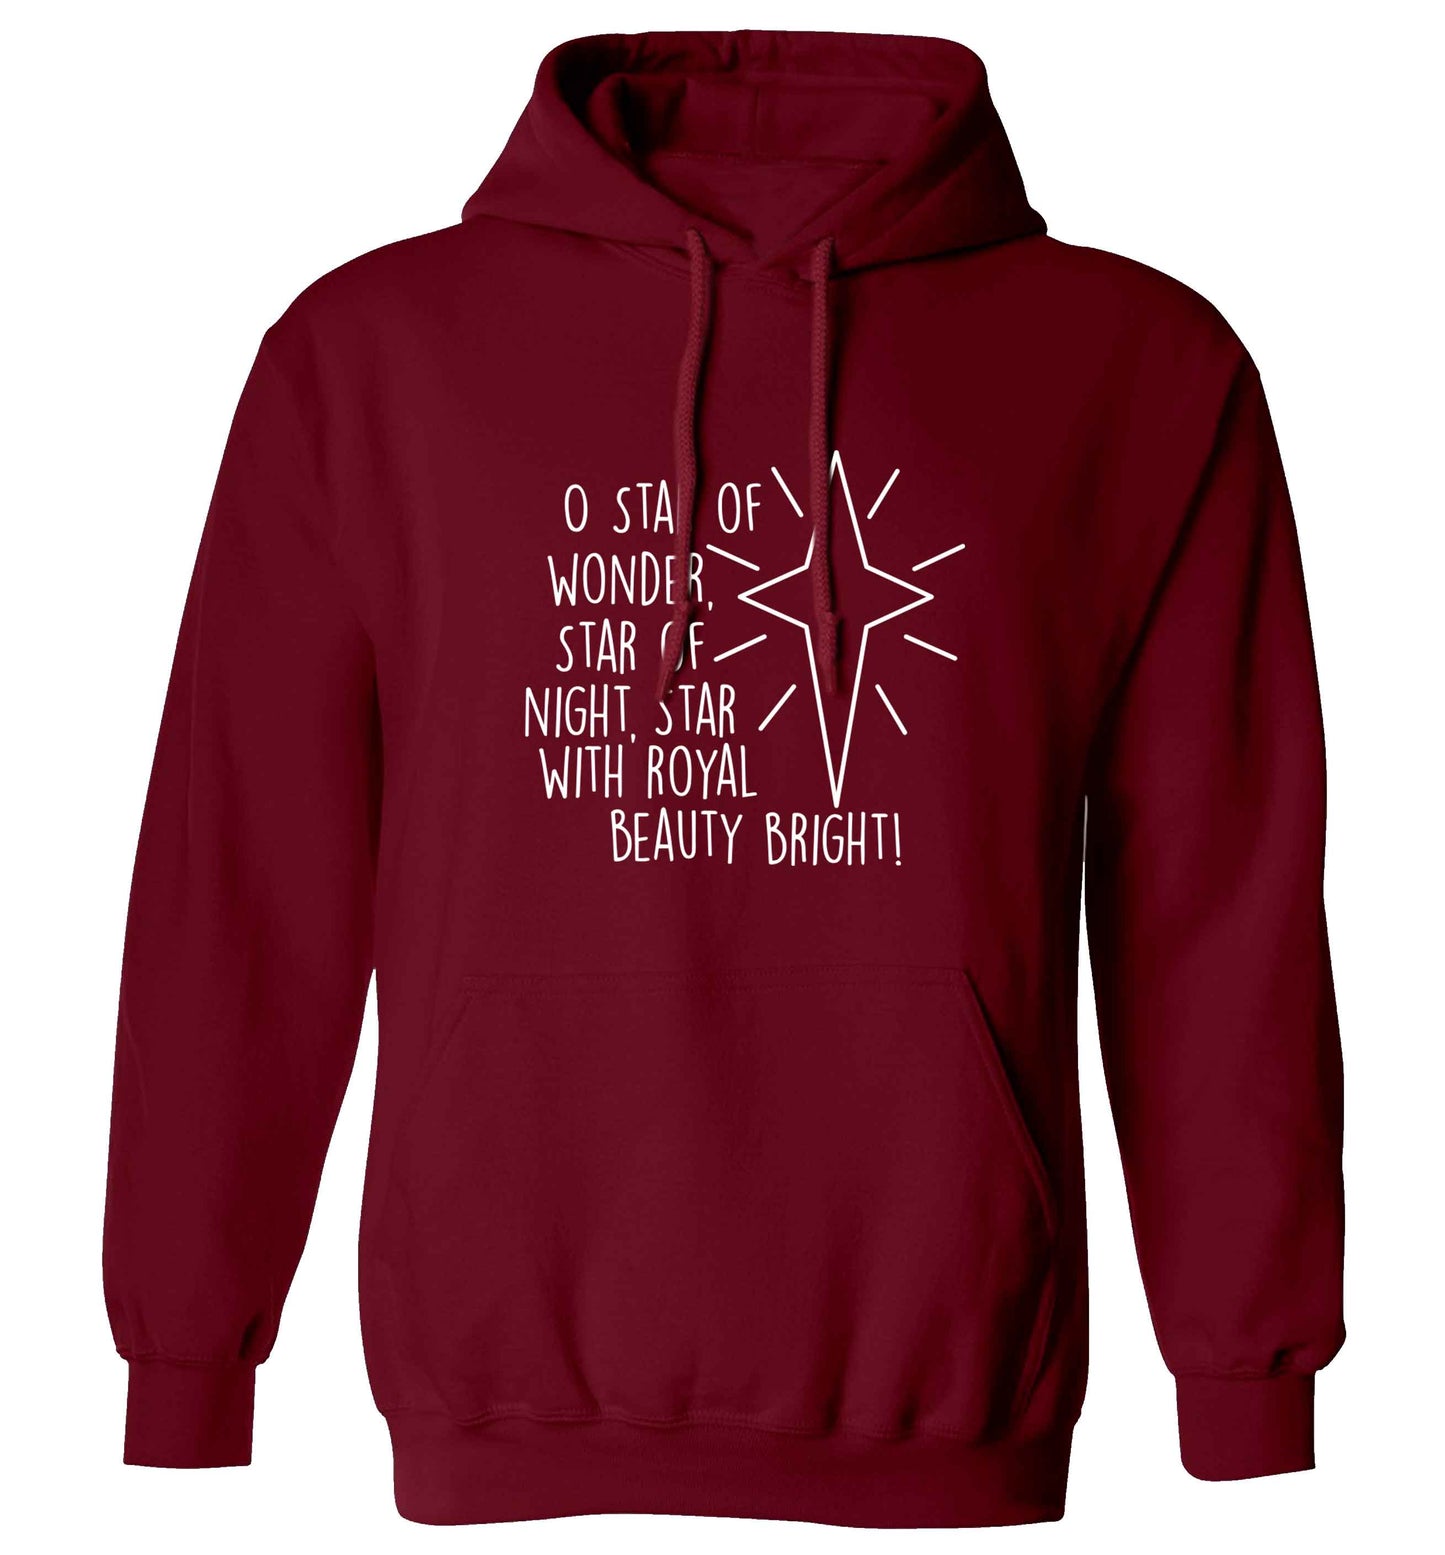 Oh star of wonder star of night, star with royal beauty bright adults unisex maroon hoodie 2XL